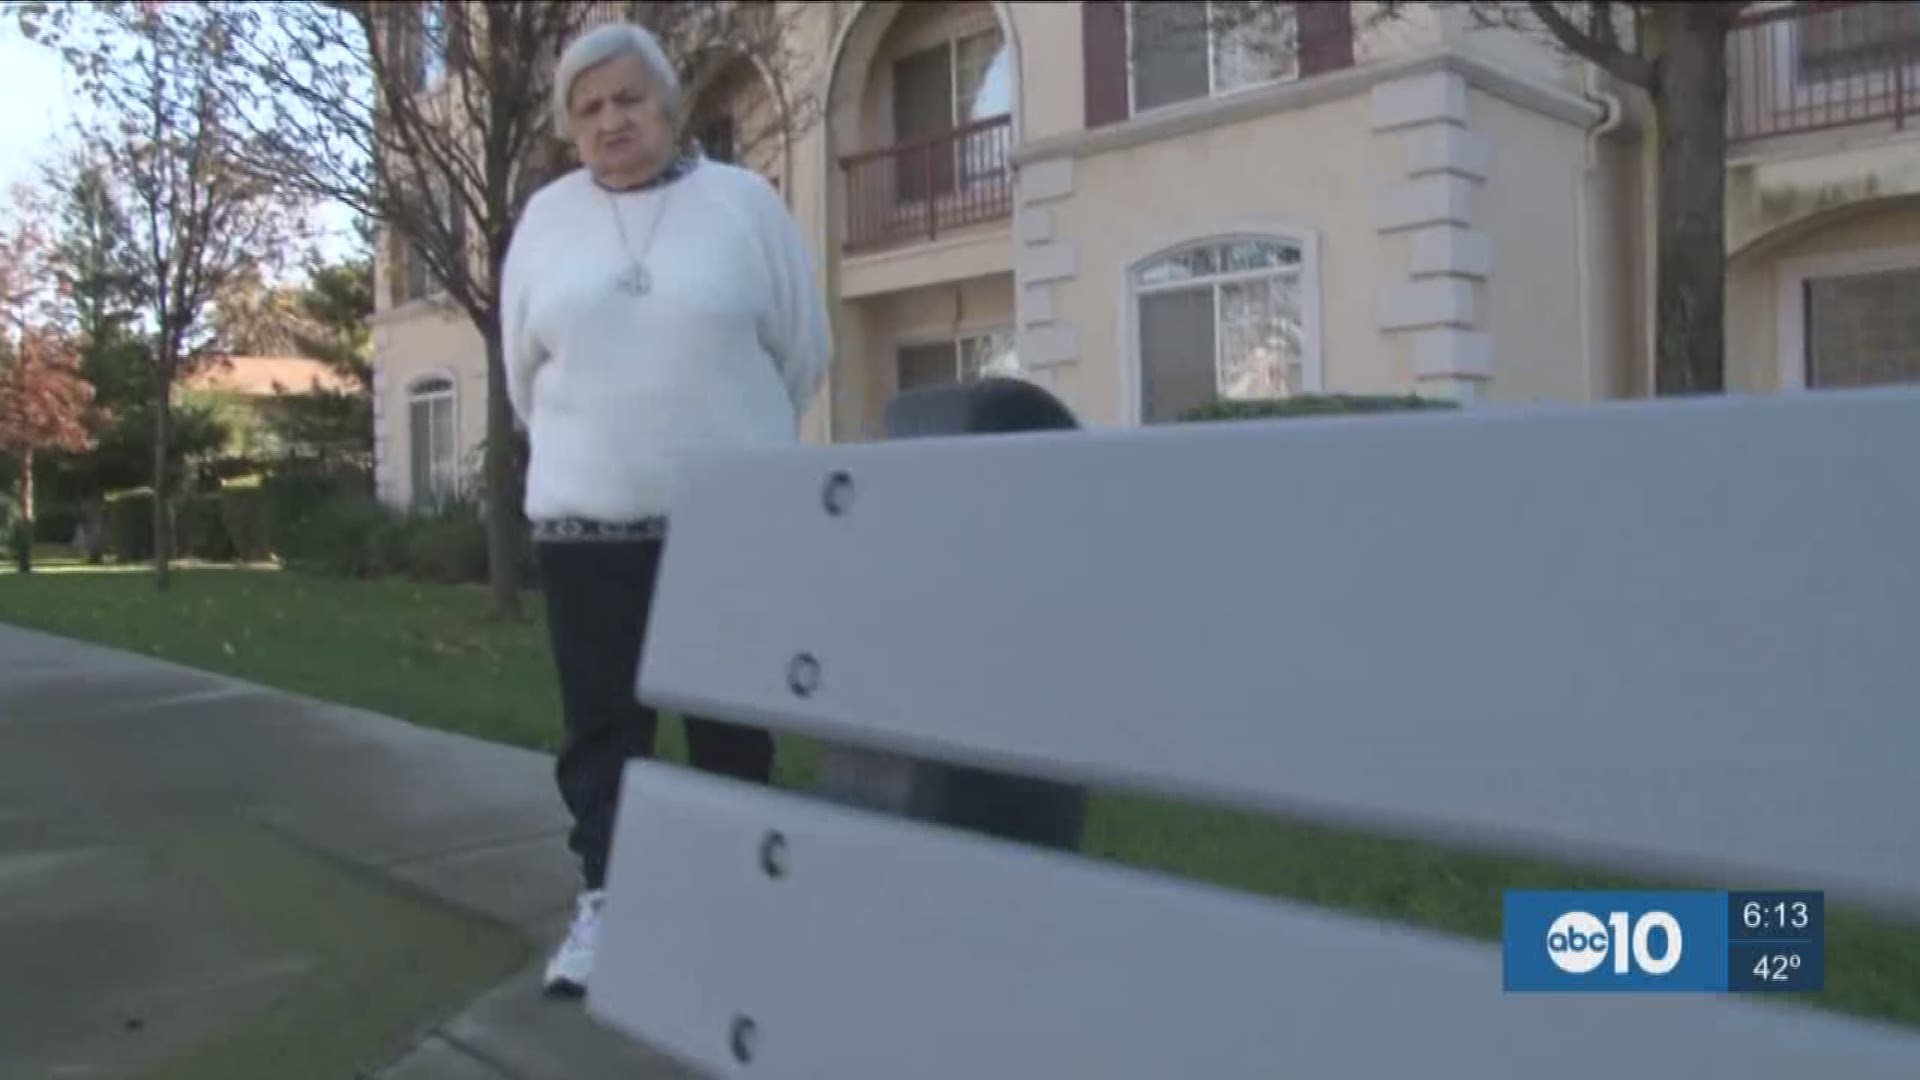 A Turlock senior citizen has been through a lot in her life. Now she's dealing with another problem and hopes the city will have a change of heart. (Jan. 5, 2017)